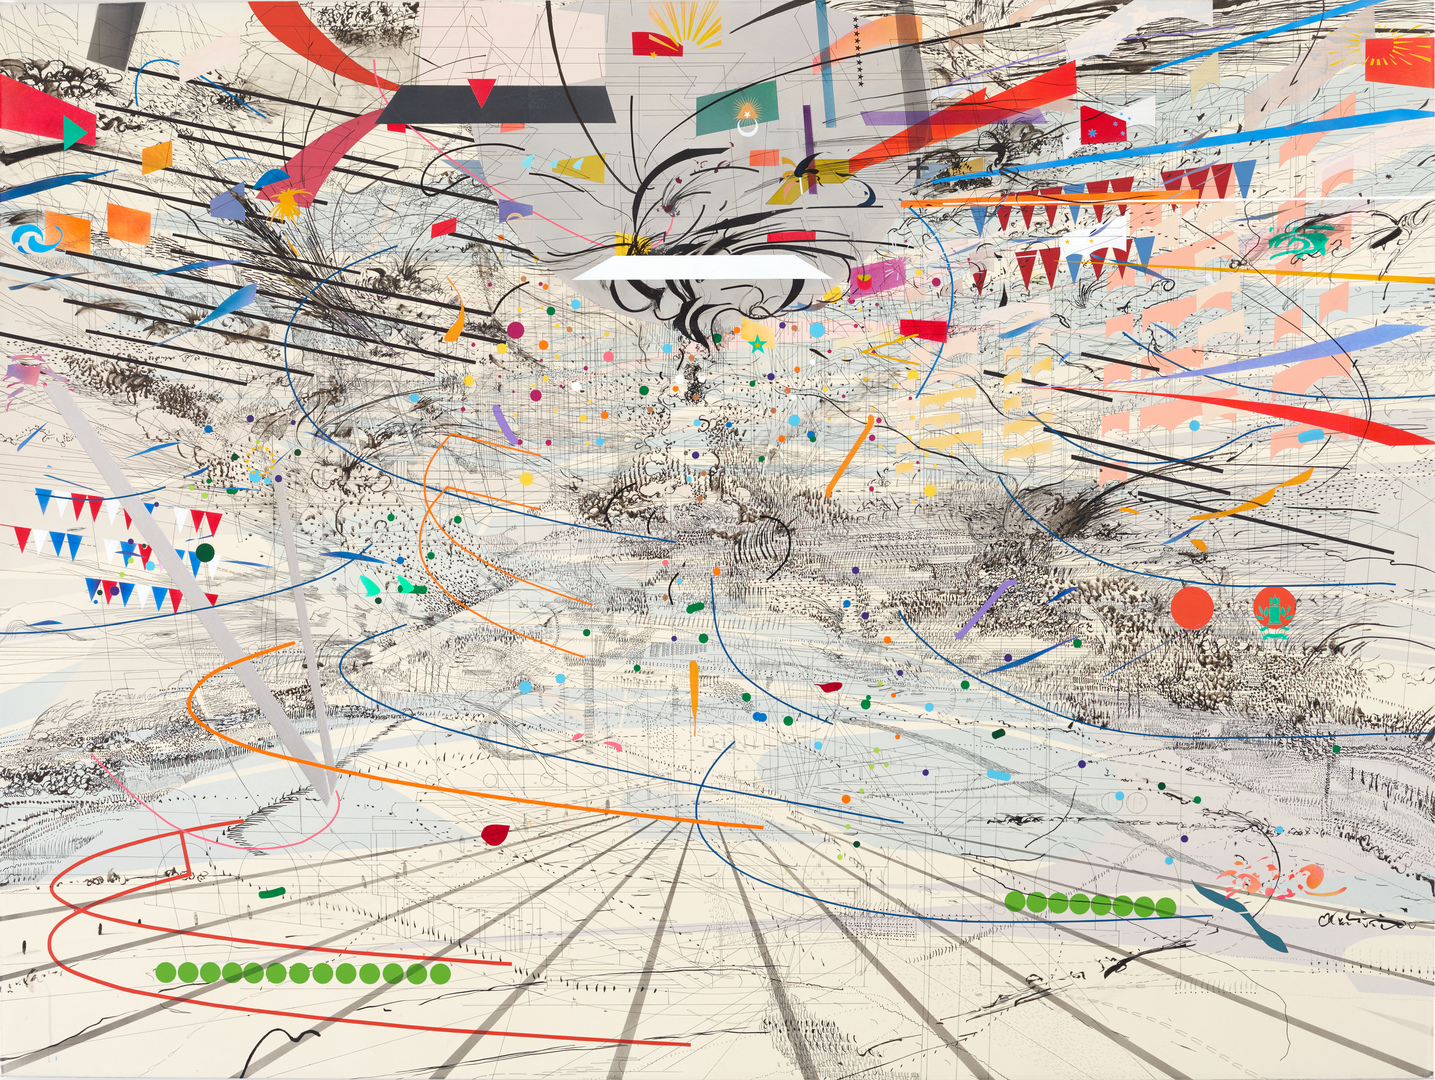 Julie Mehretu - Congress, 2003, ink and acrylic on canvas